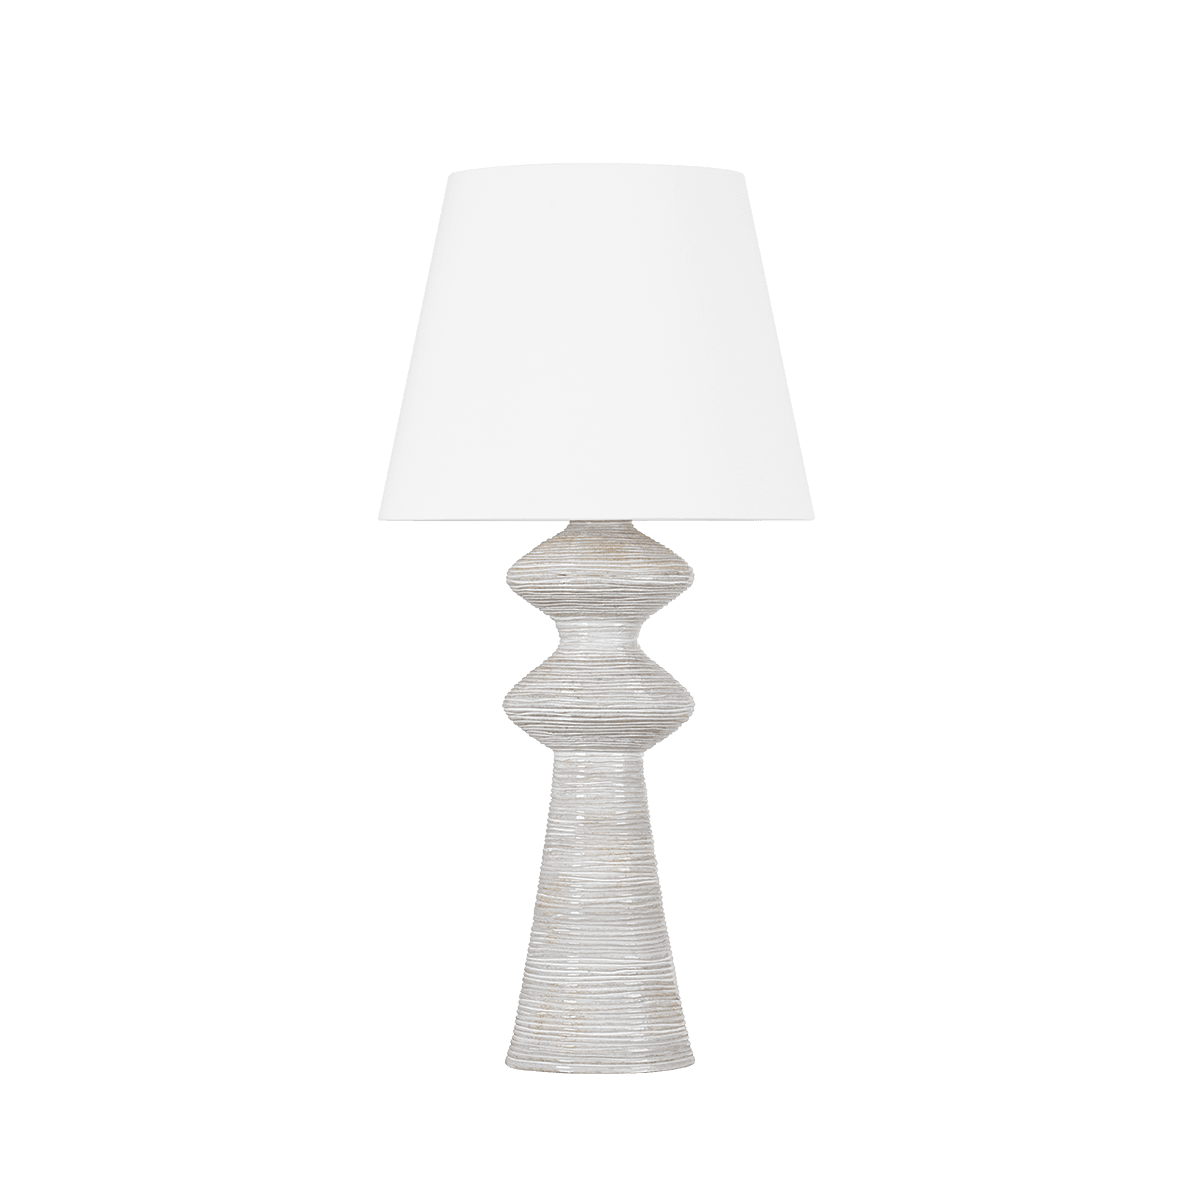 Hudson Valley Lighting - Steinway Table Lamp - L5537-AGB/CNB | Montreal Lighting & Hardware